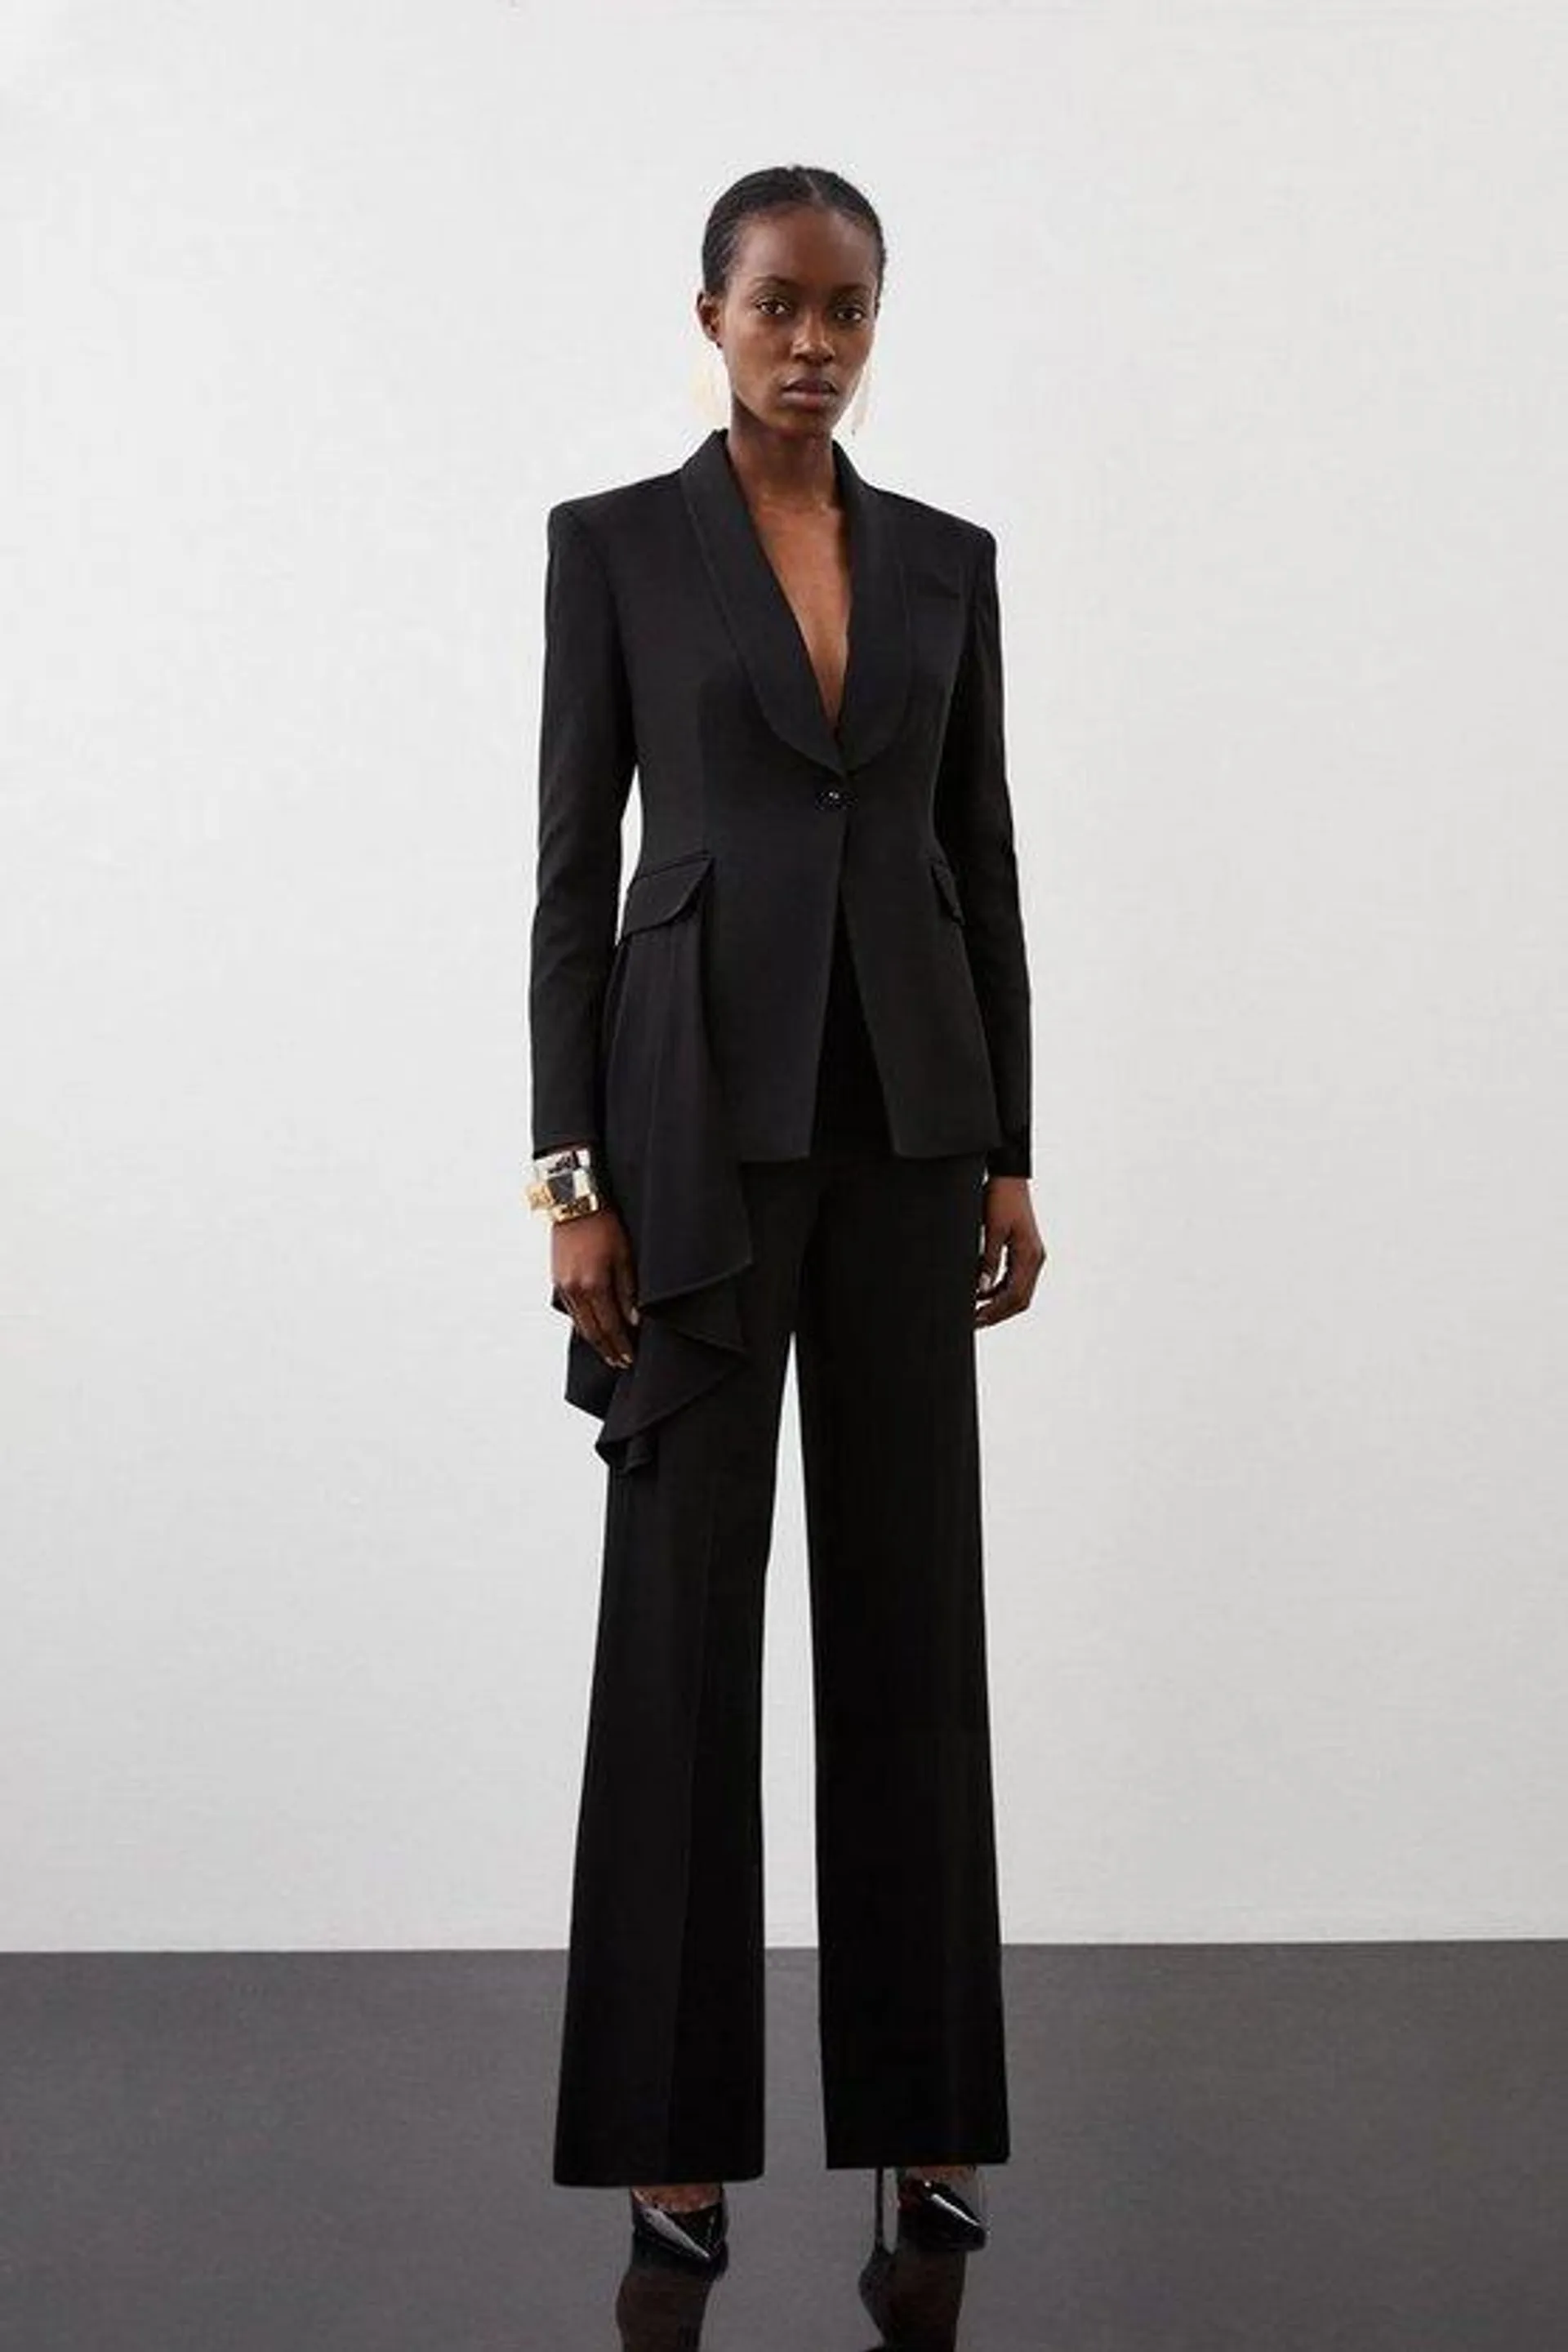 Polished Viscose Wide Leg Tailored Trousers